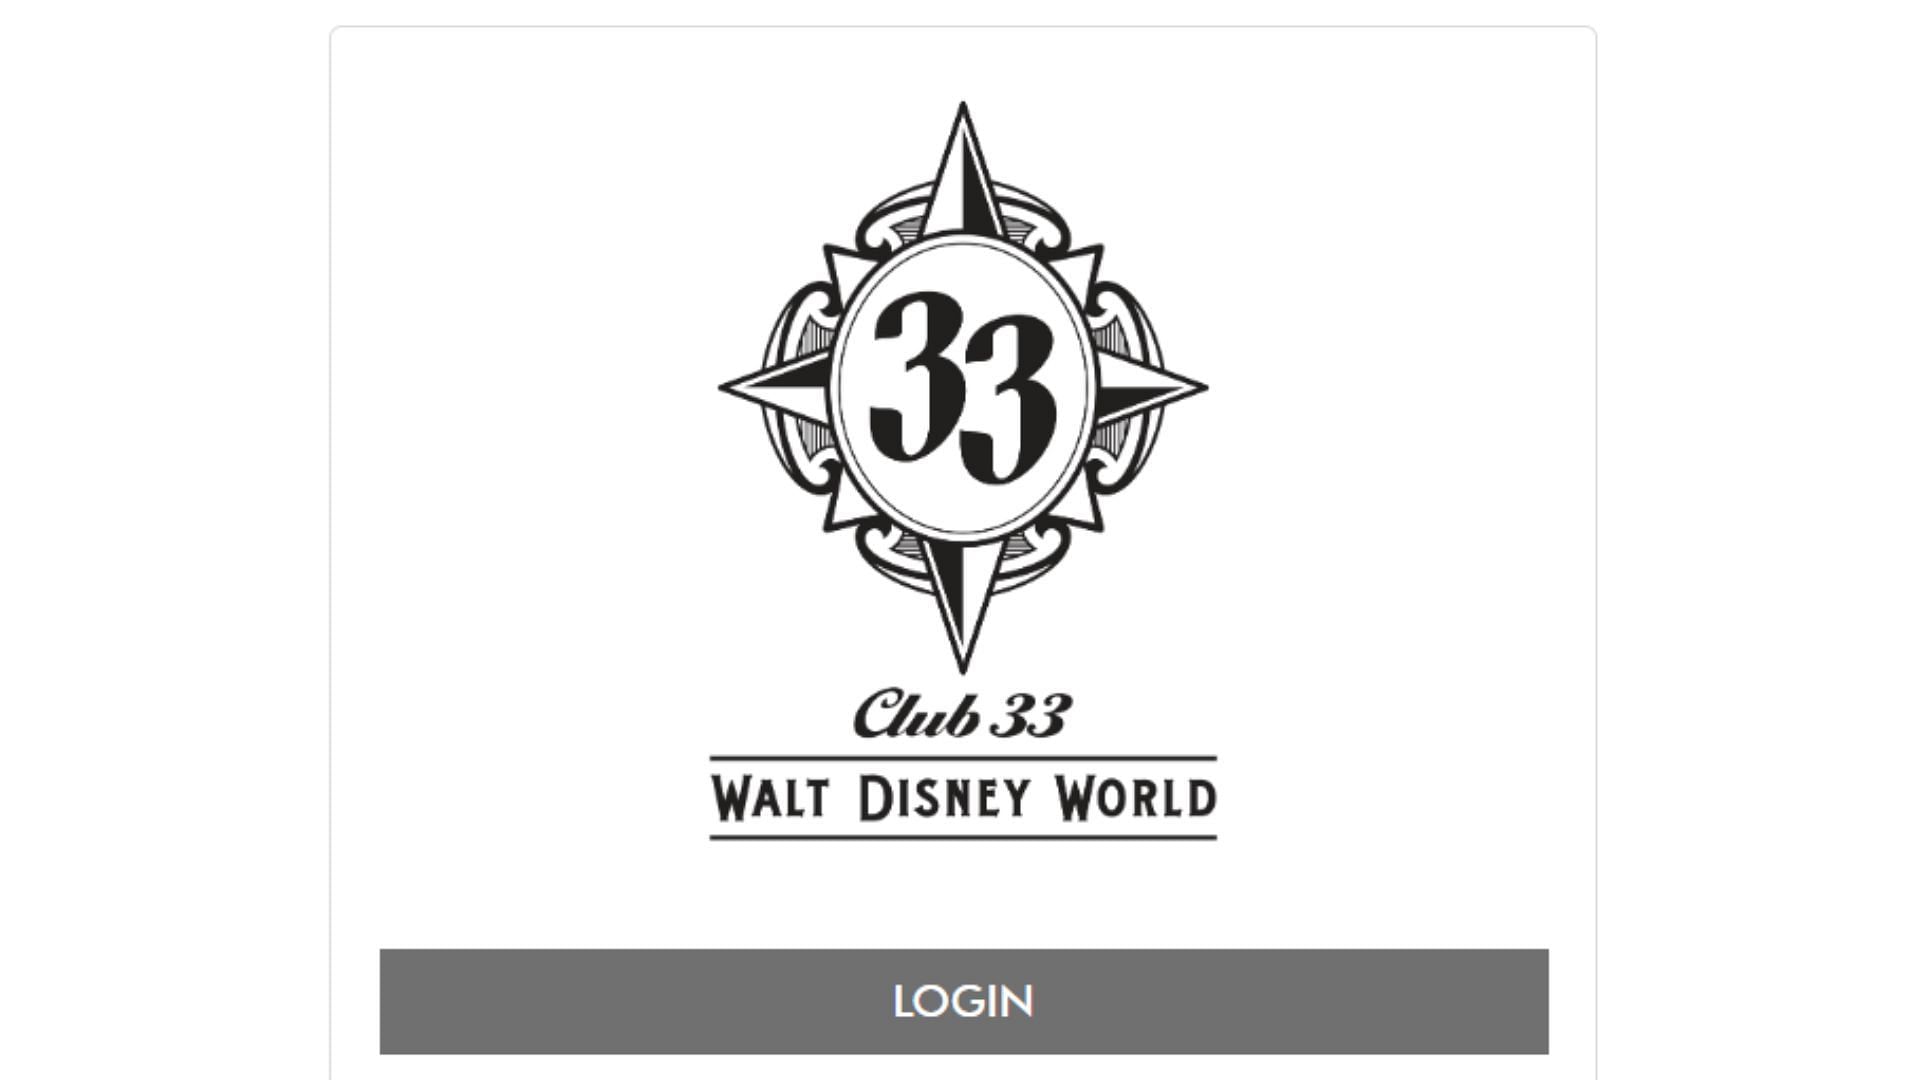 The image of the member login page of the club (Image via Club33 Walt Disney World)